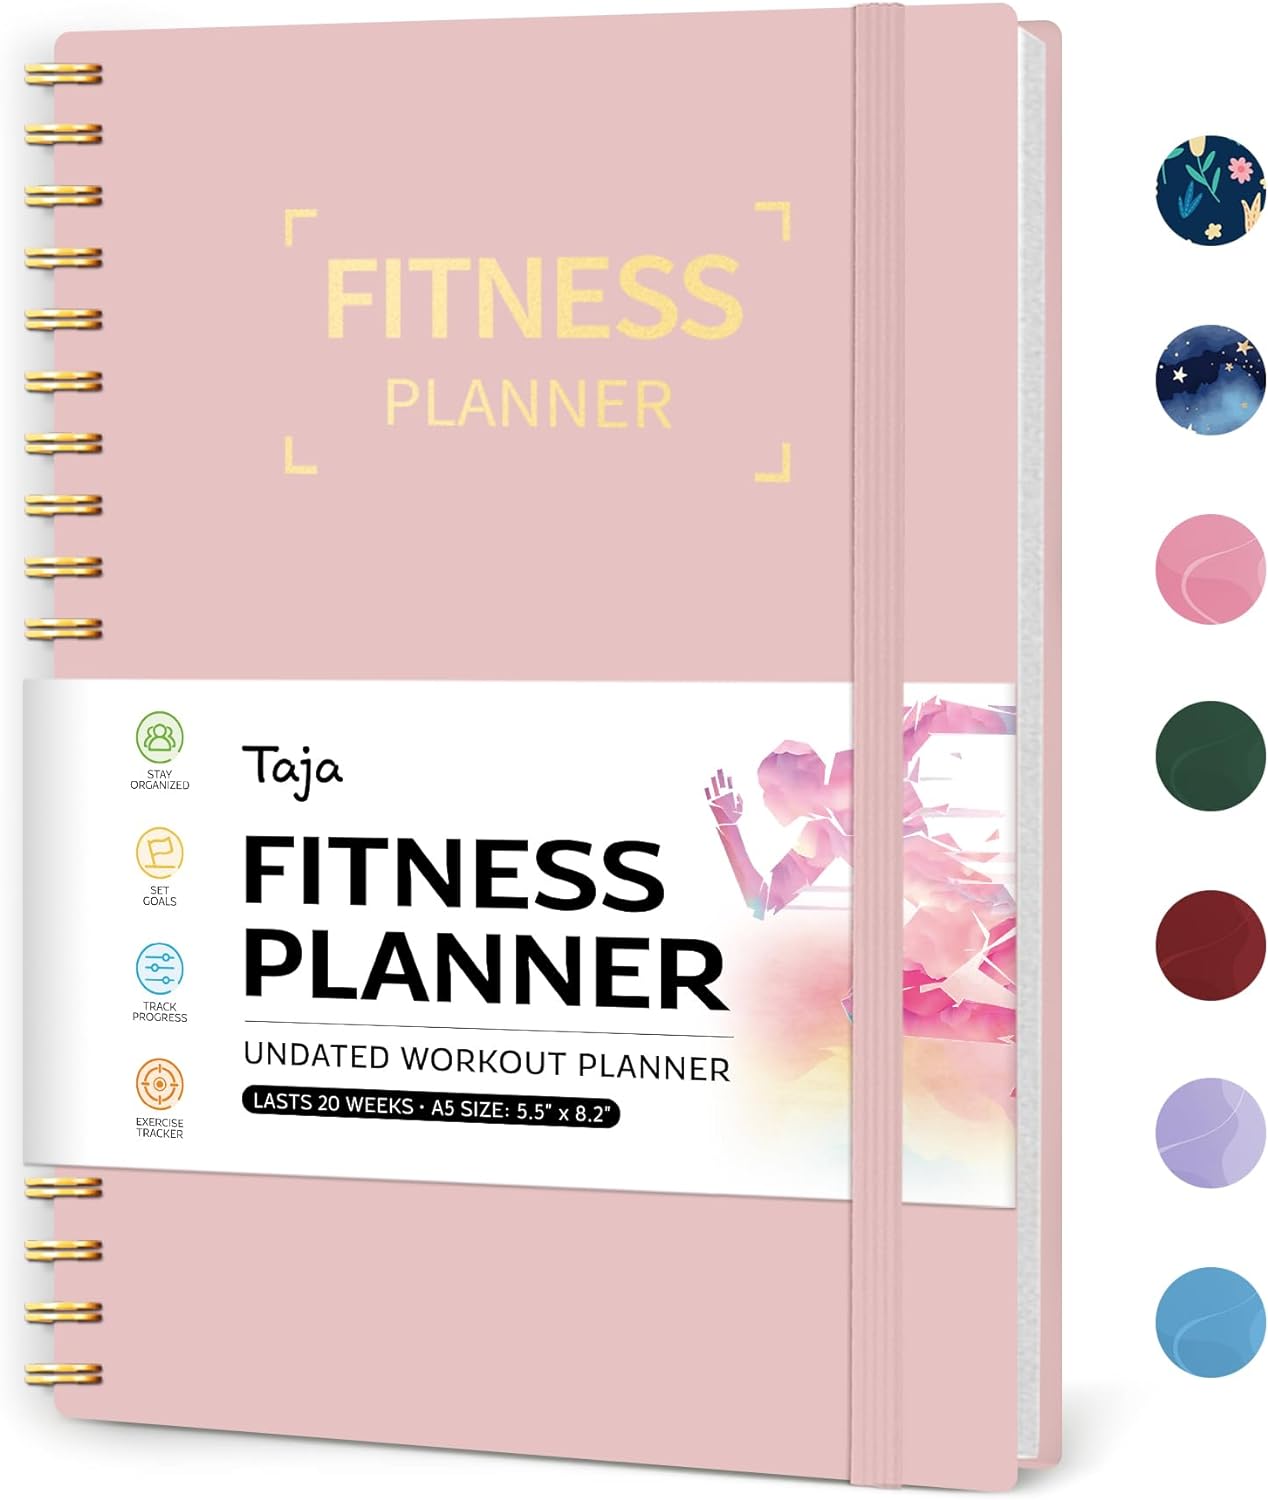 Progress Tracking Journal for Fitness - Log Book Planner - Fitness Tracking Notebook - Workout Logger